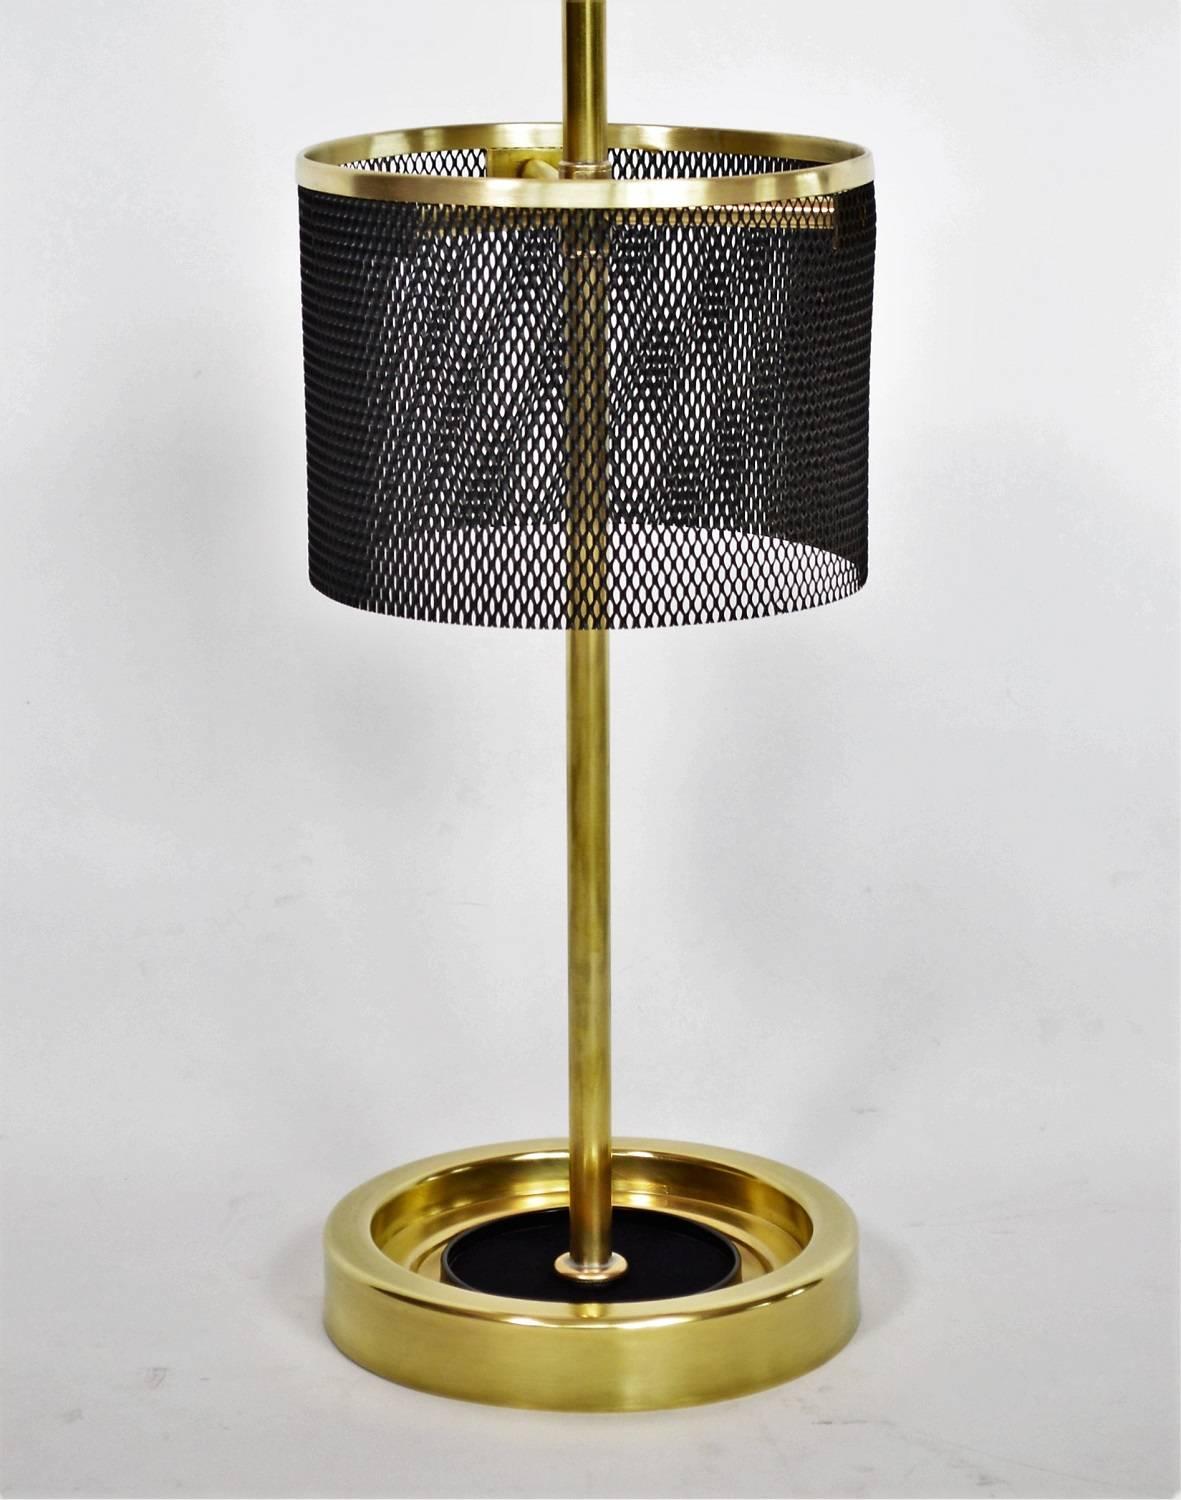 Gorgeous umbrella stand made of full brass and perforated metal with Bakelite knob in the style of Mathieu Matégot.
Manufactured in Italy in the 1950s, excellent design and highest craftsmanship.
The umbrella stand have been fully restored, the